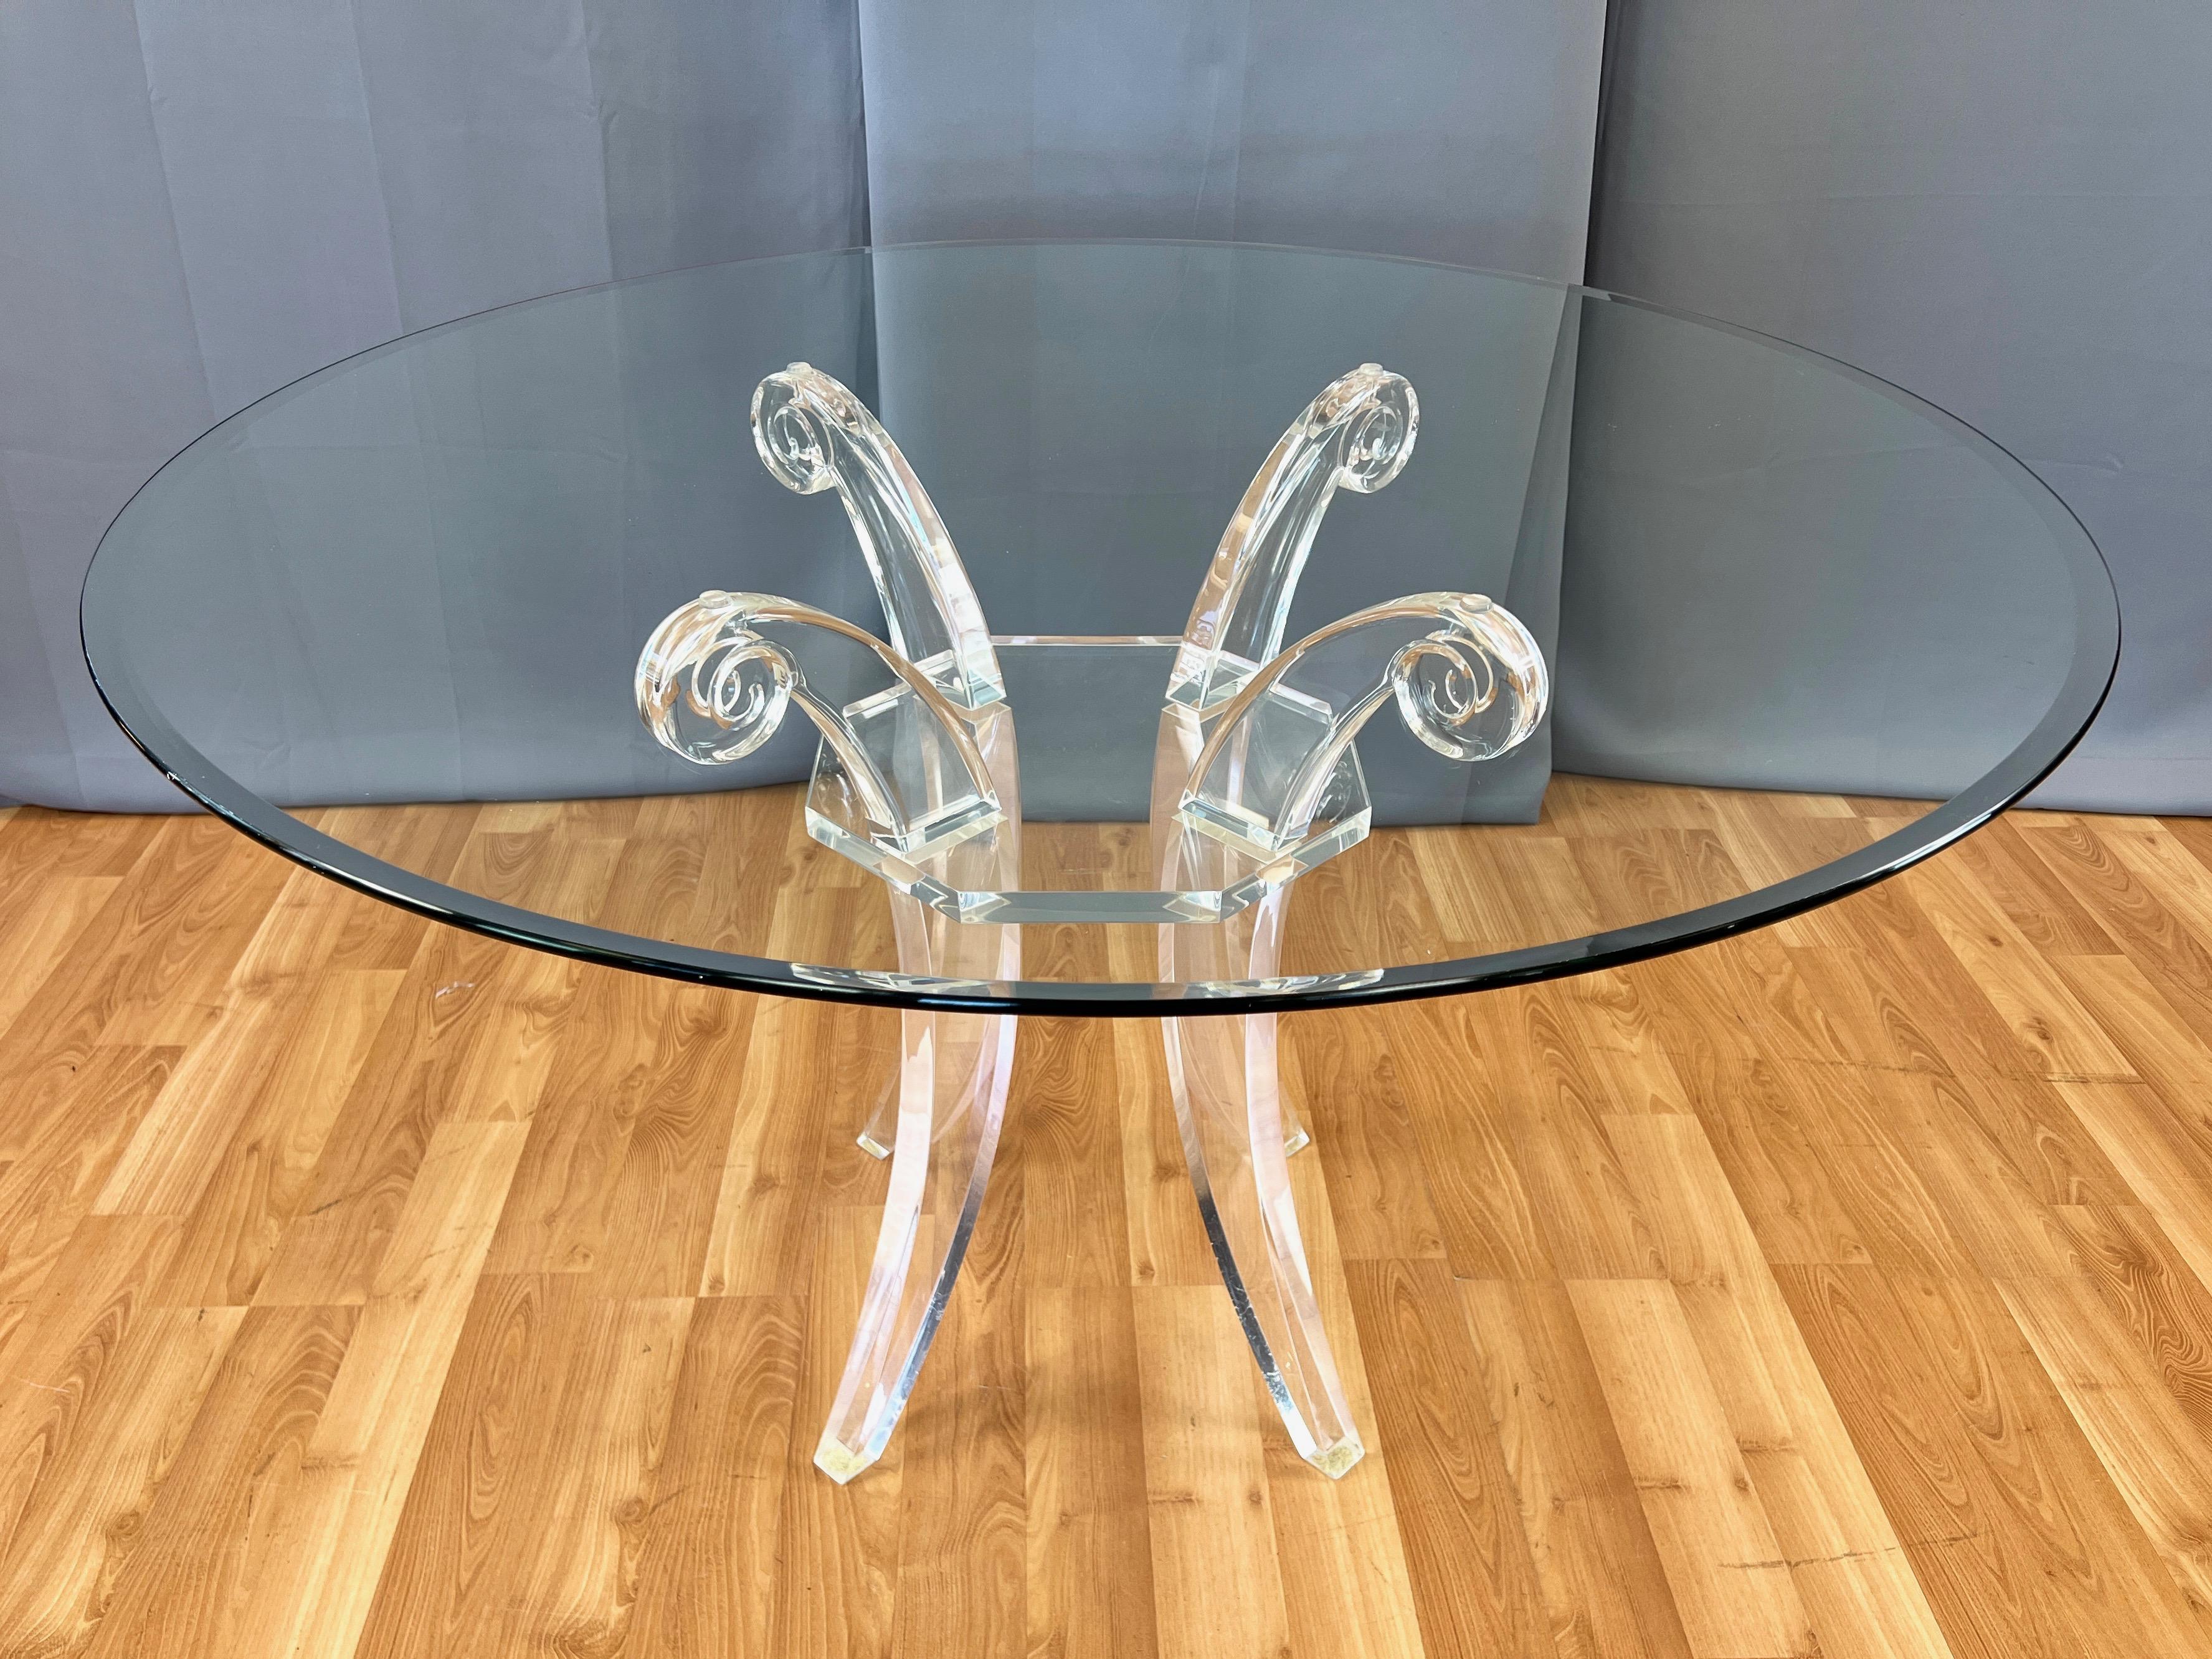 Hollywood Regency Lucite Saber Leg Scroll-Motif Dining Table with Round Glass Top, circa 1980